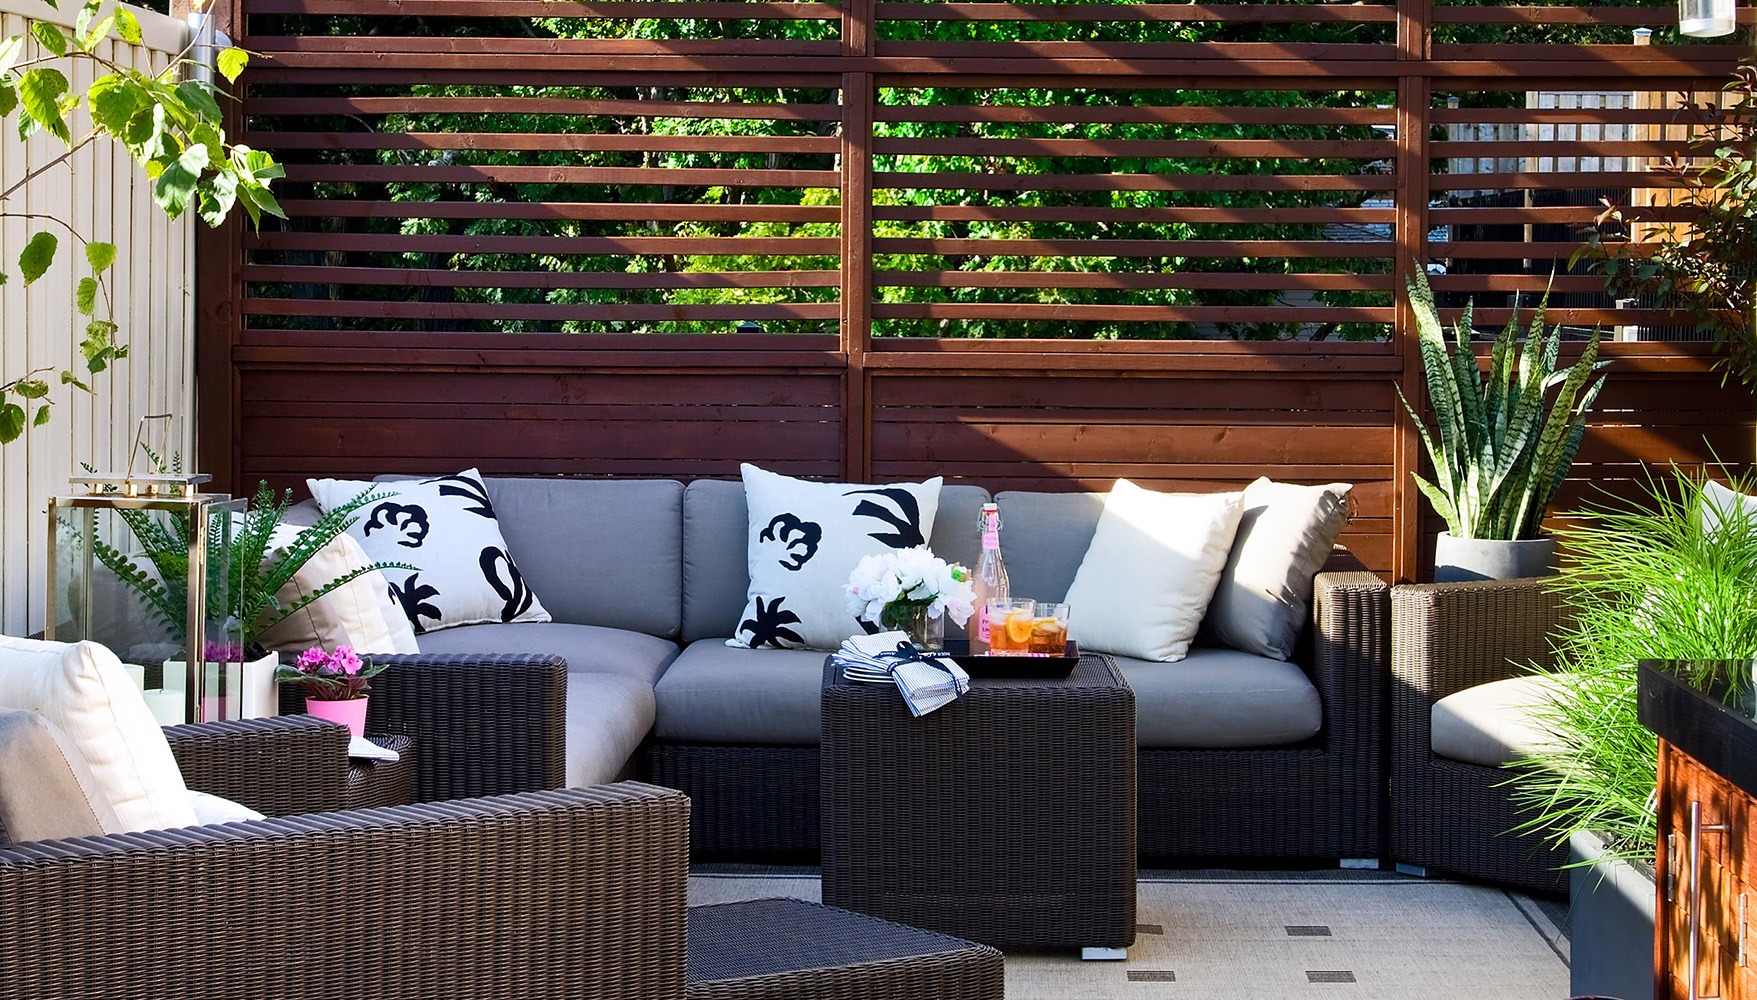 Fenced off area with couch and beverages on a centerpiece